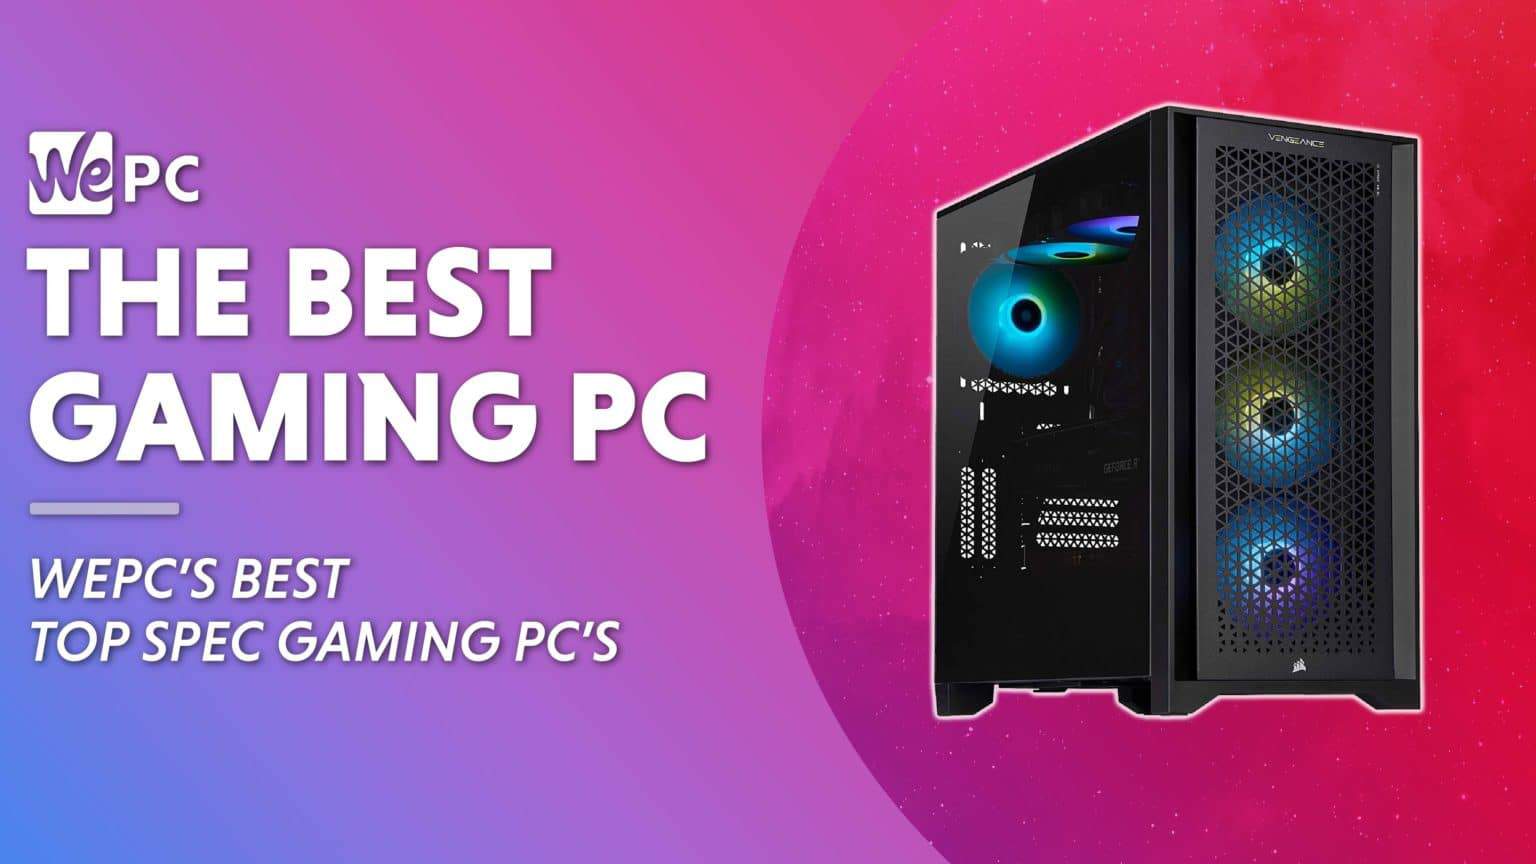 Wooden Gaming Pc Build Requirements for Streamer